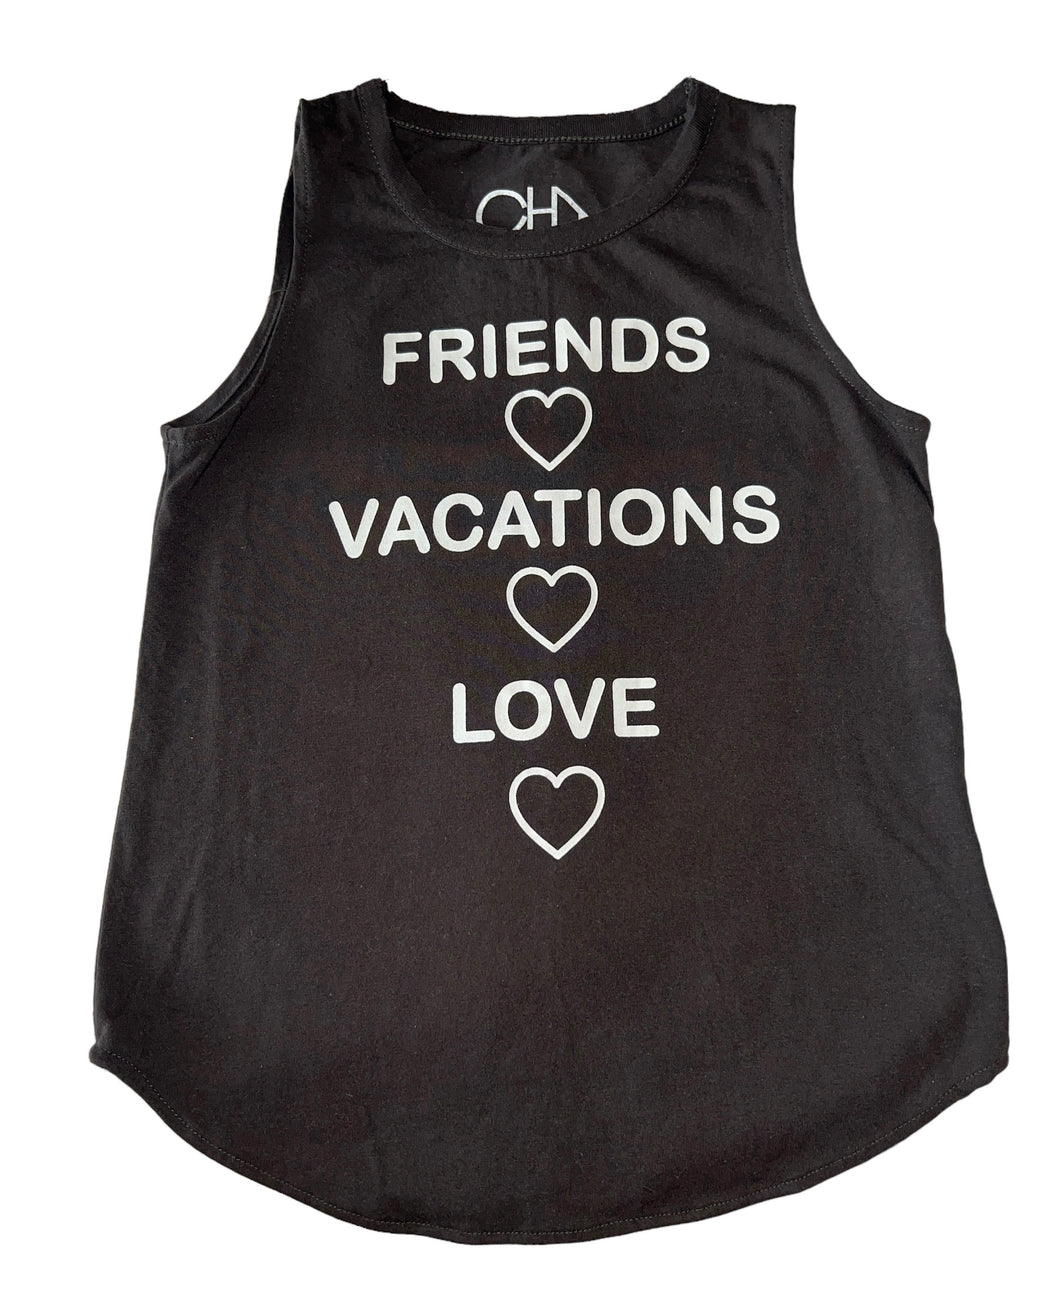 Chaser brand girls FRIENDS VACATIONS LOVE muscle tank top 8